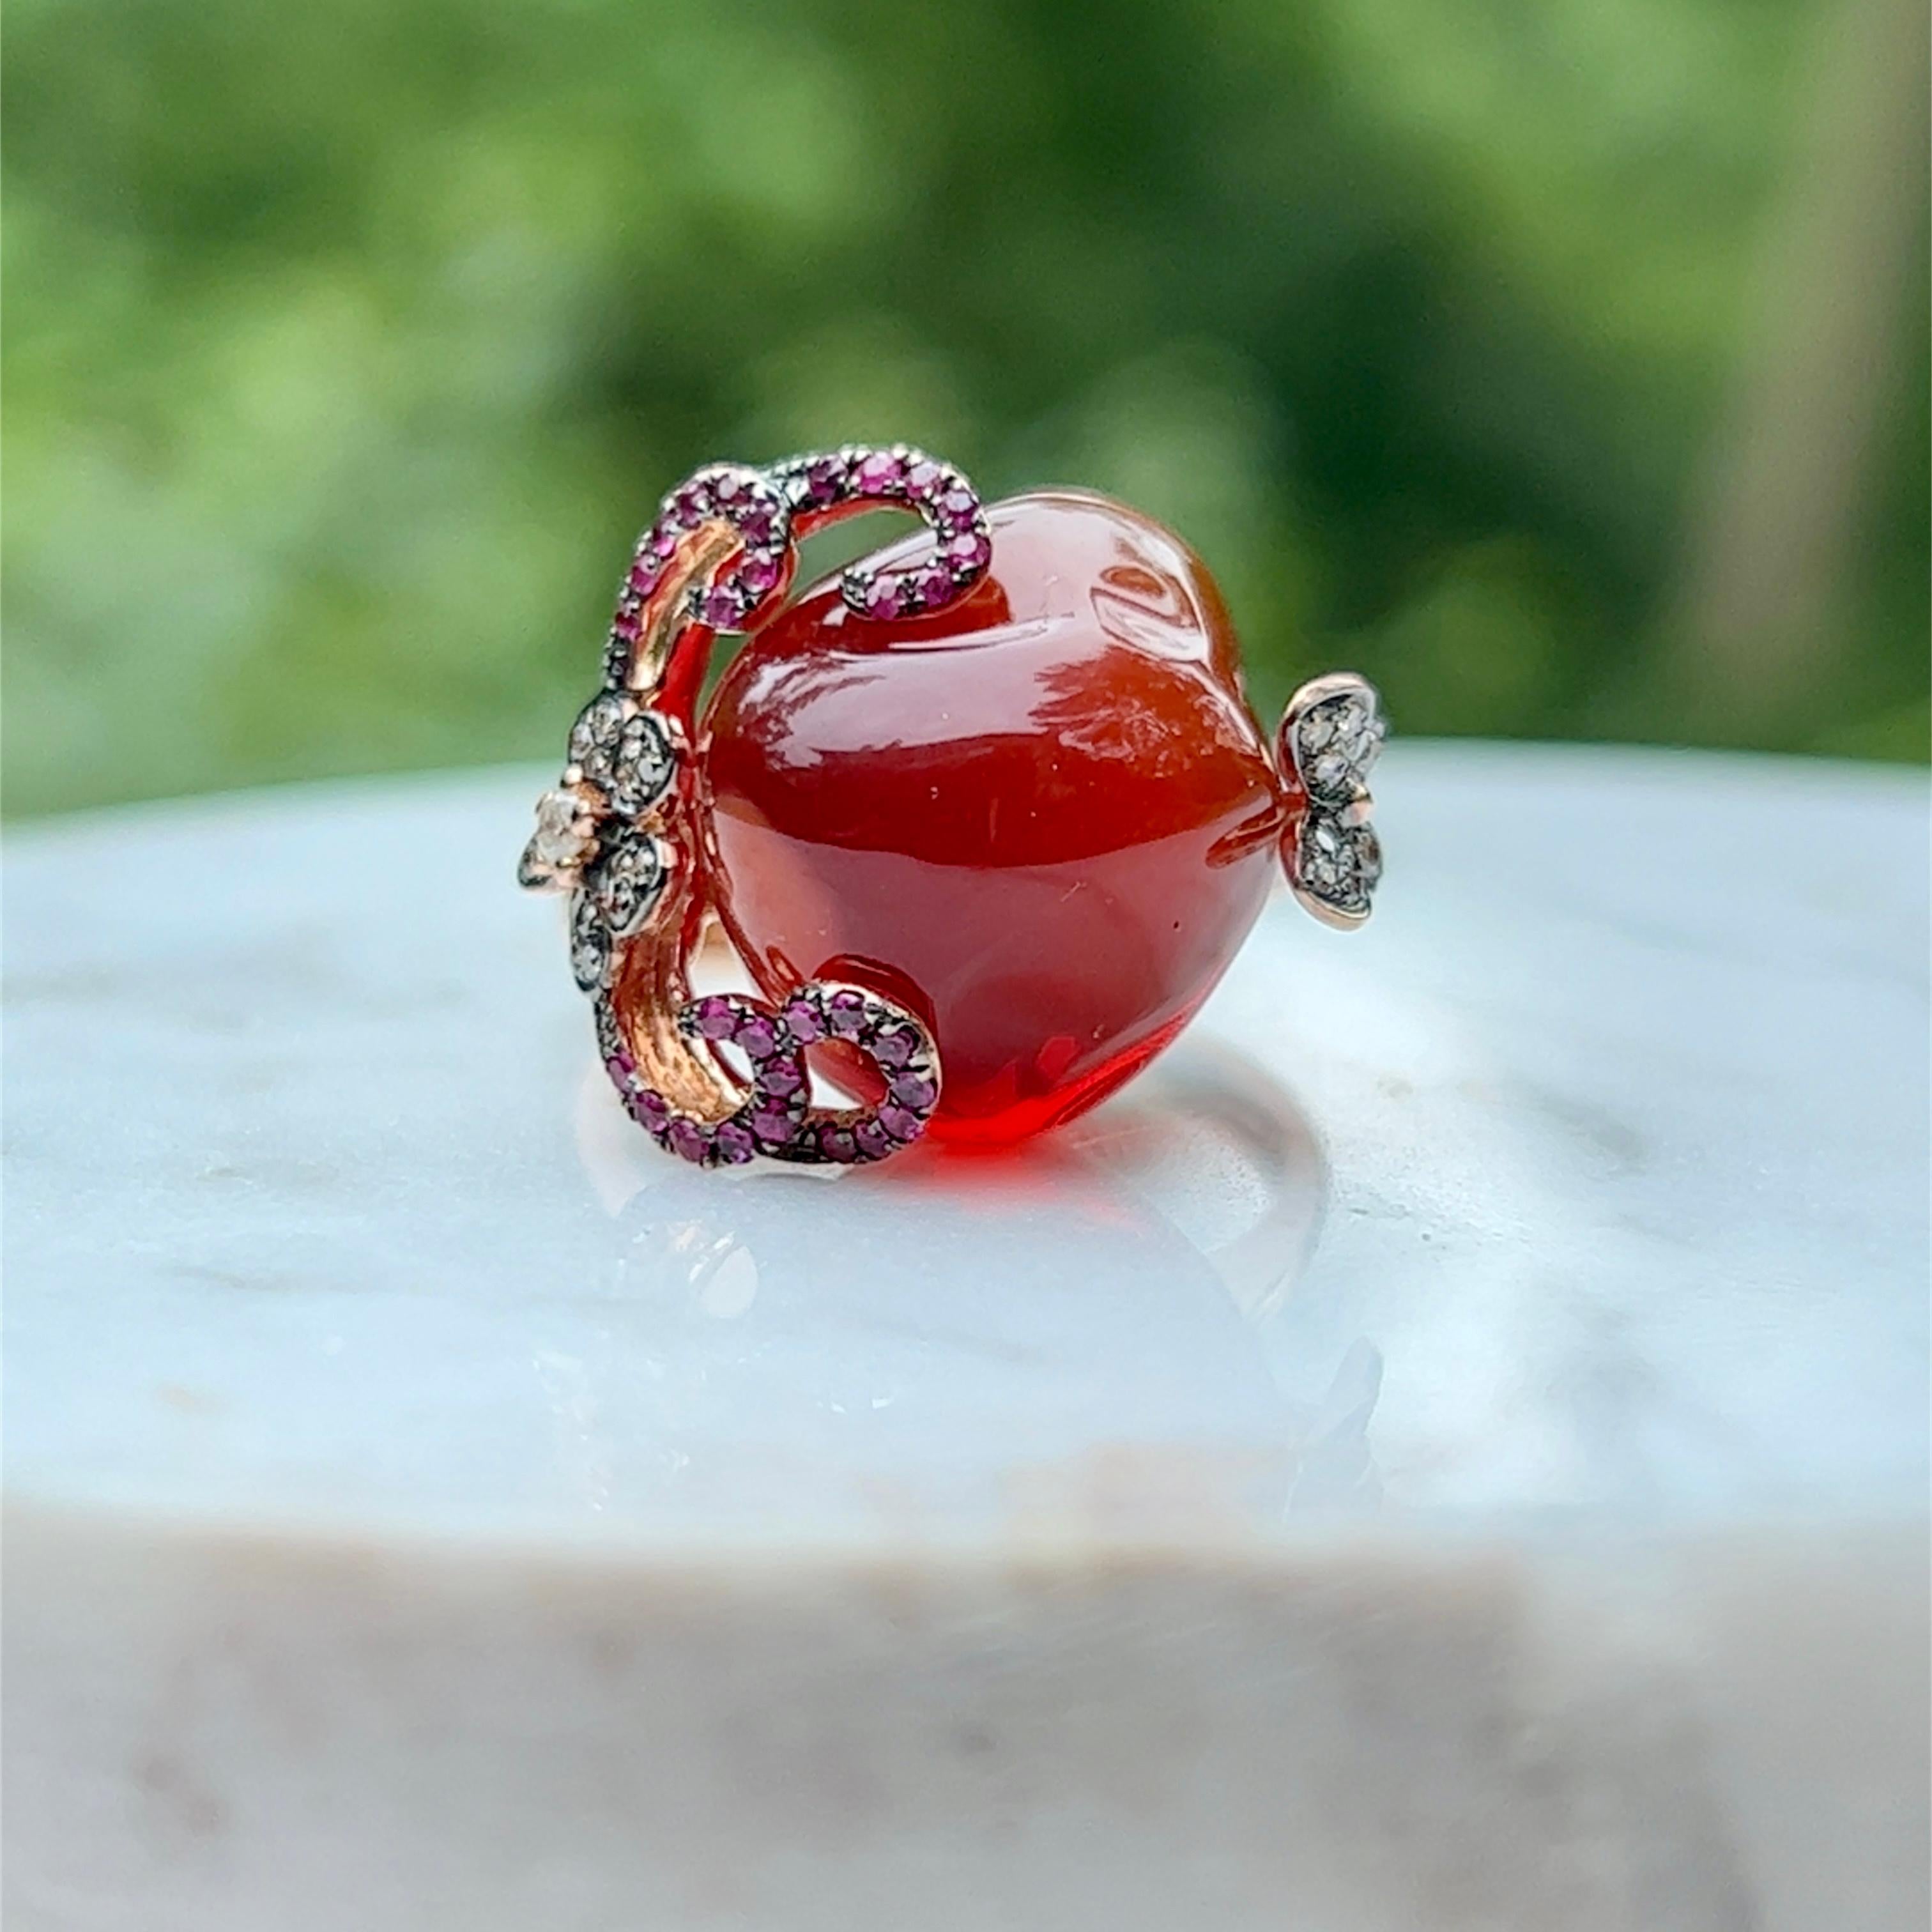 12.24 Carat Mexican Fire Opal with Diamonds and Rubies in 14K Rose Gold 3